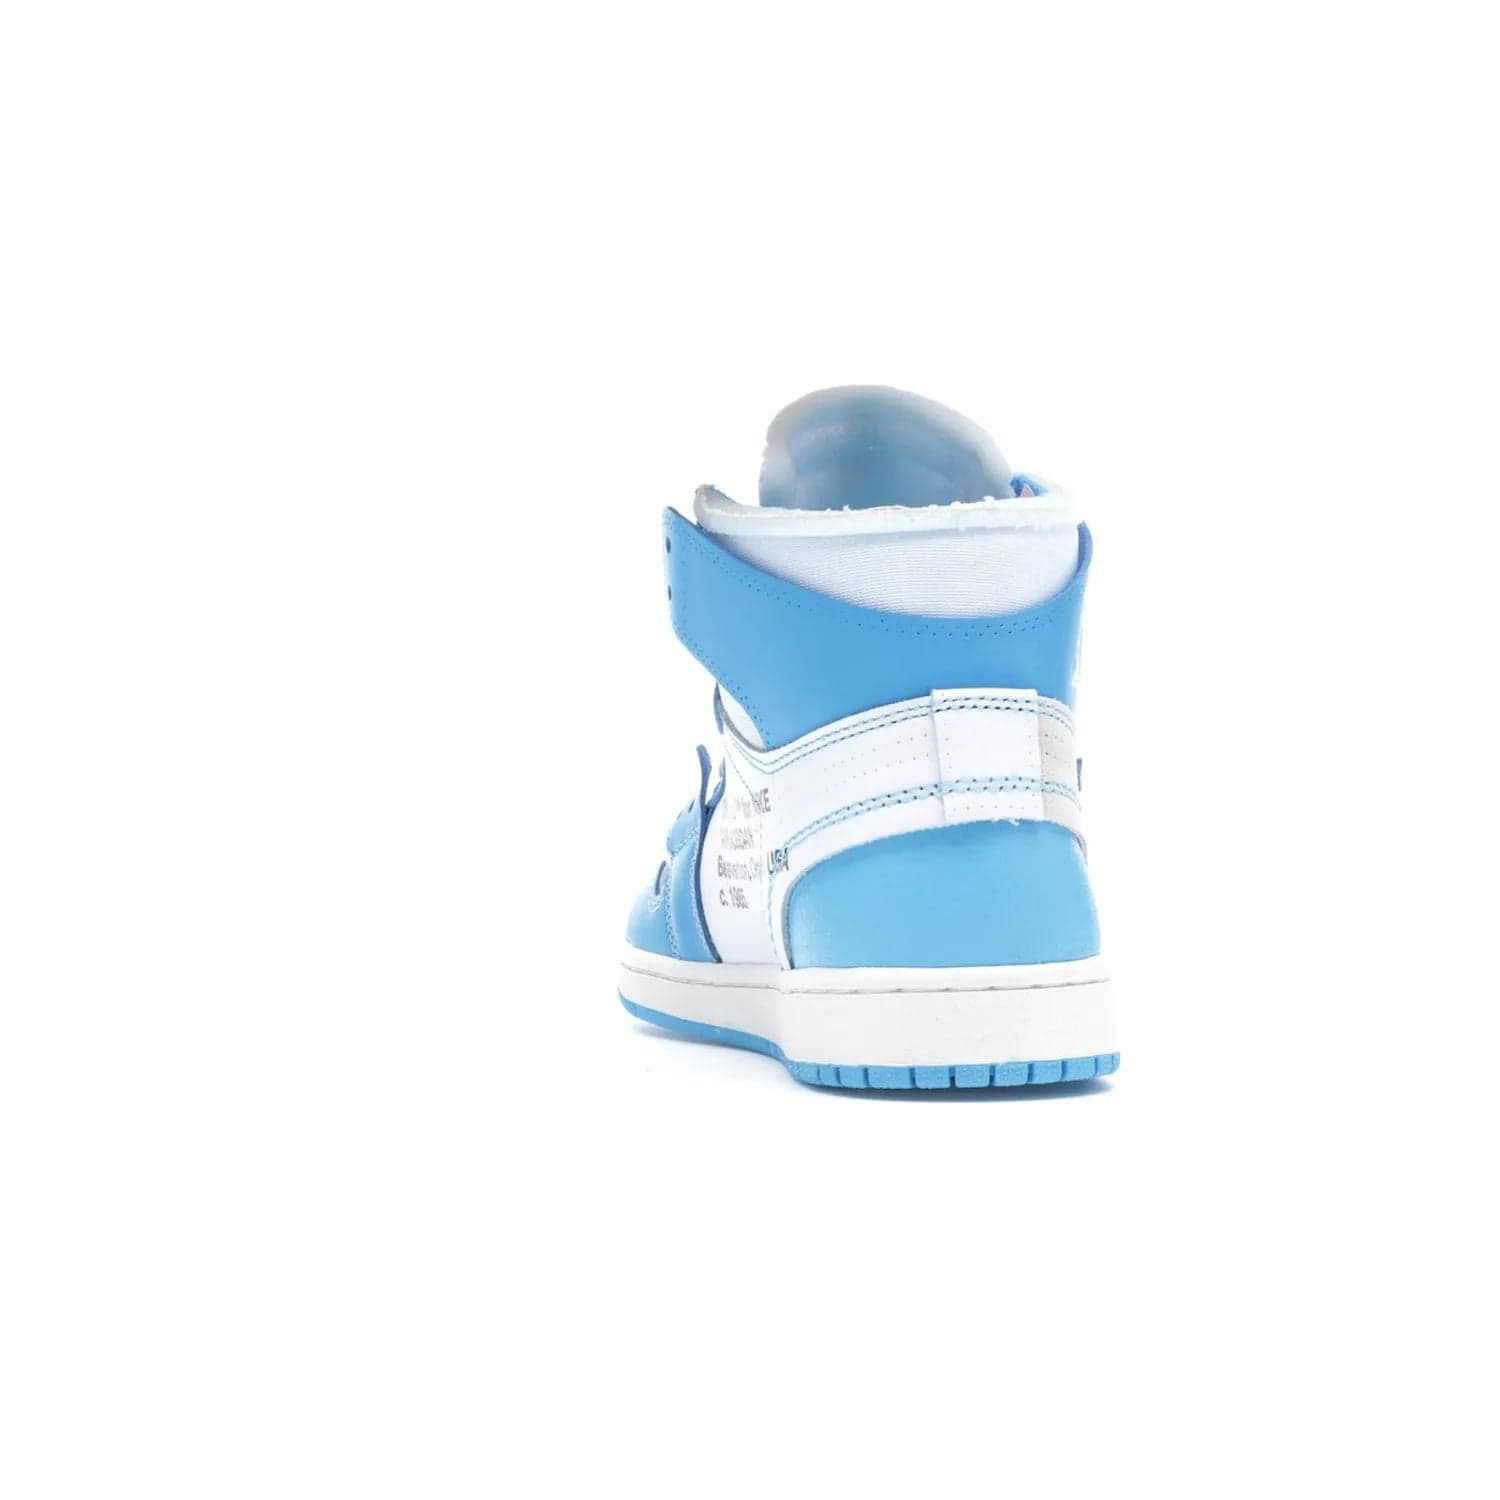 Jordan 1 Retro High Off-White University Blue - Image 27 - Only at www.BallersClubKickz.com - Classic Jordan 1 Retro High "Off-White UNC" sneakers meld style and comfort. Boasting deconstructed white and blue leather, Off-White detailing, and a white, dark powder blue and cone colorway, these sneakers are perfect for dressing up or down. Get the iconic Off-White Jordan 1's and upgrade your look.